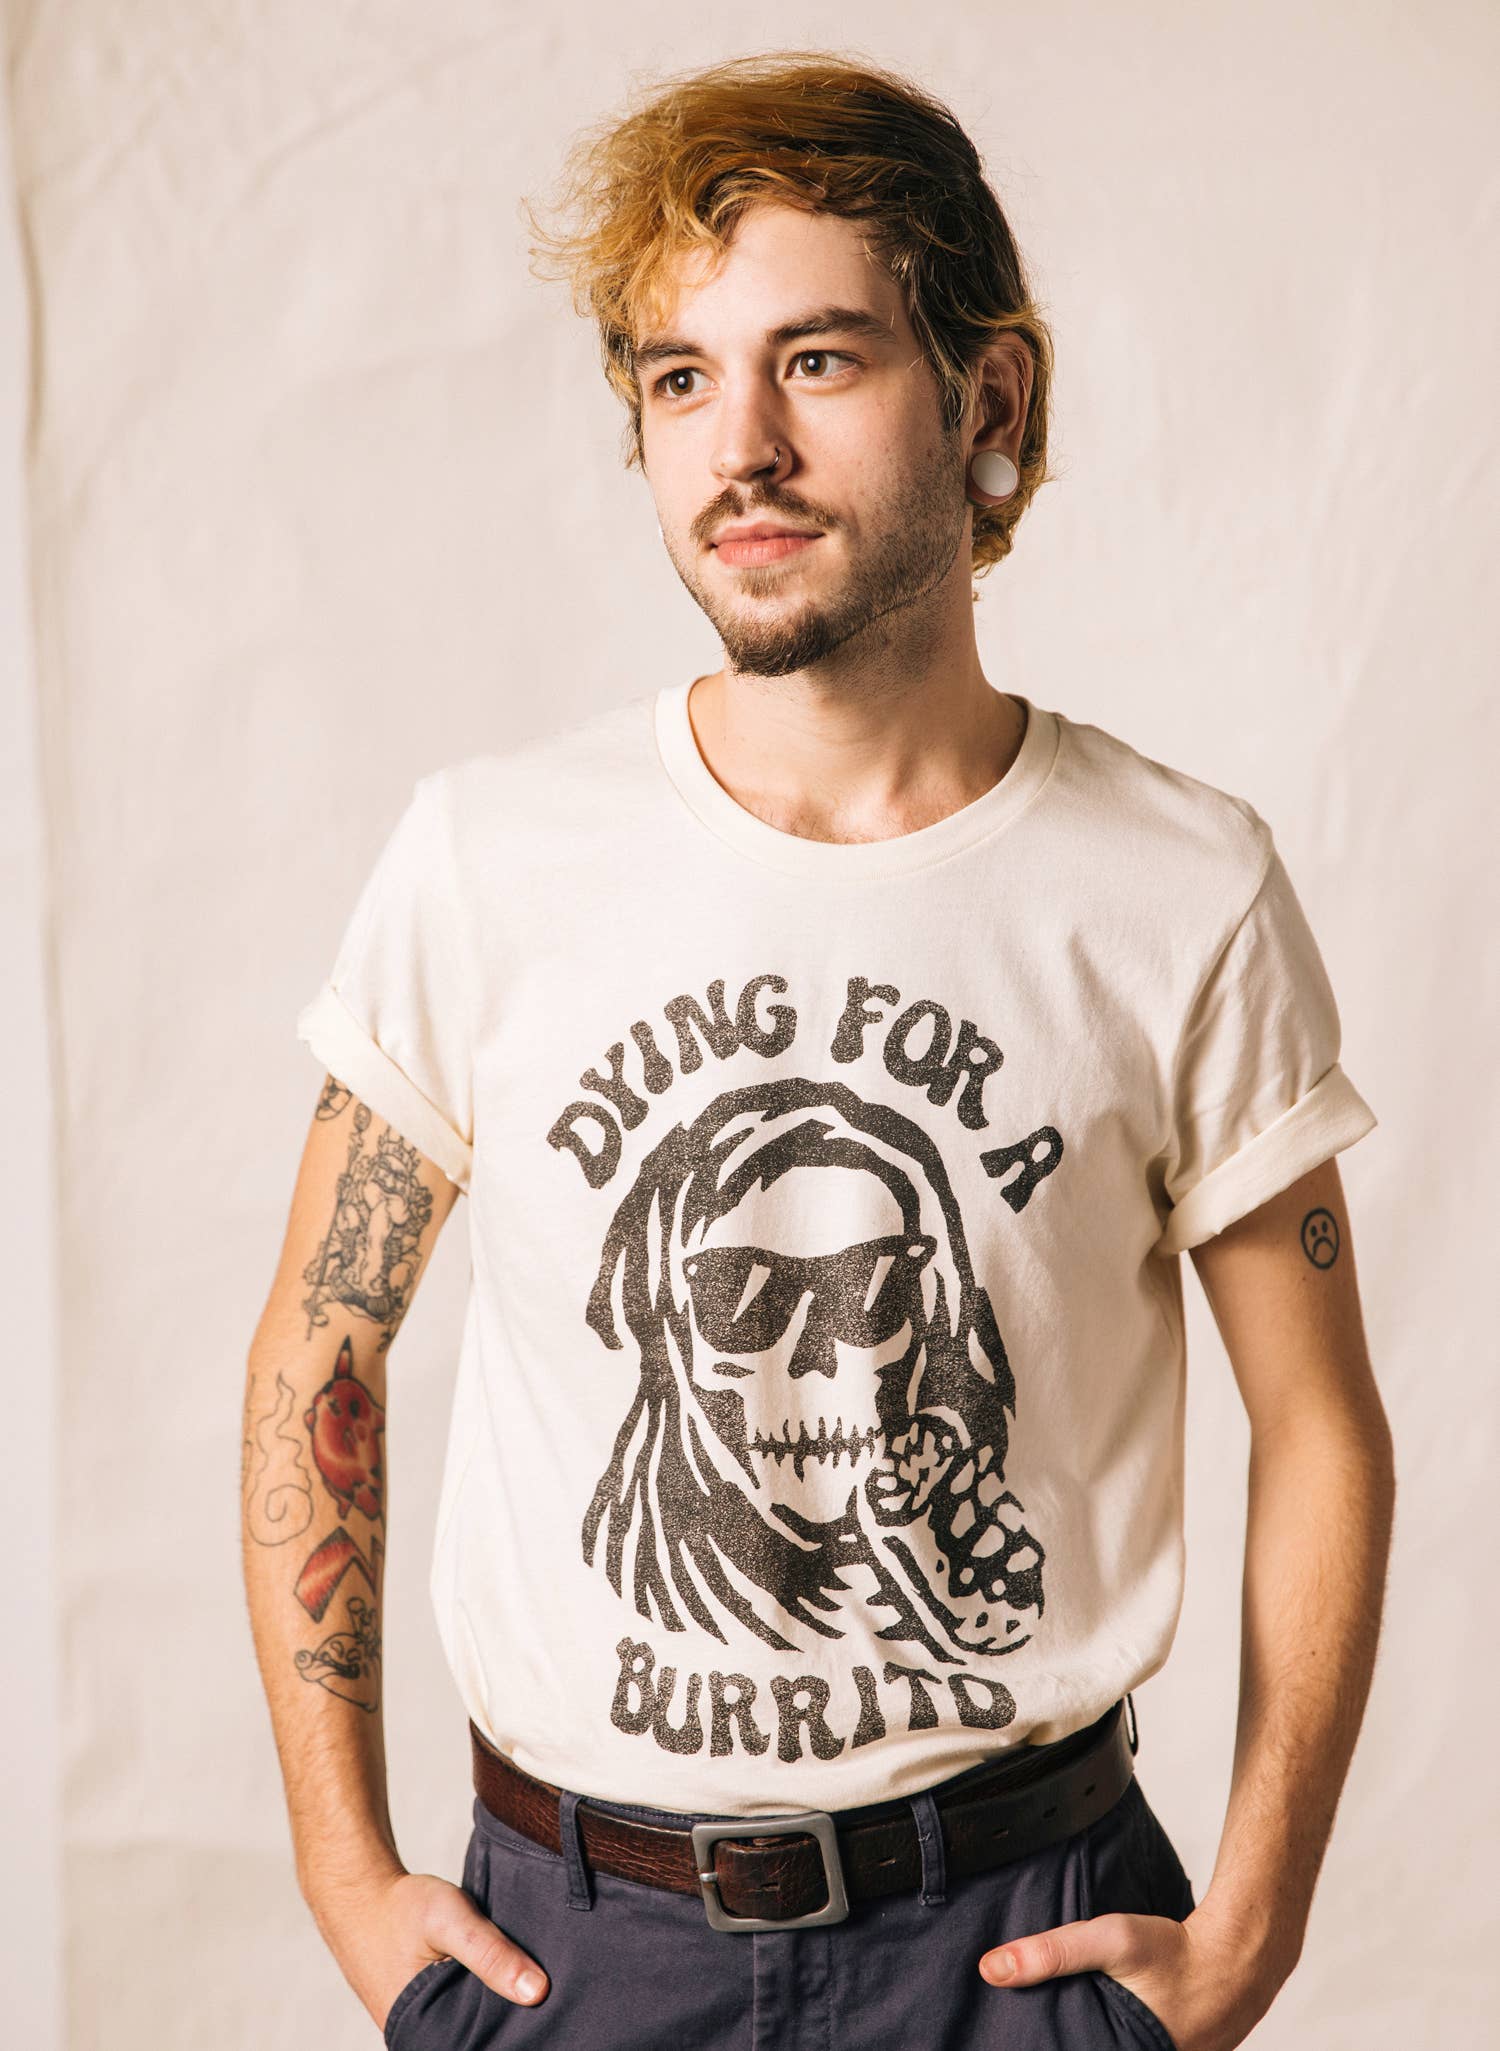 Pyknic - Dying for a Burrito Tee